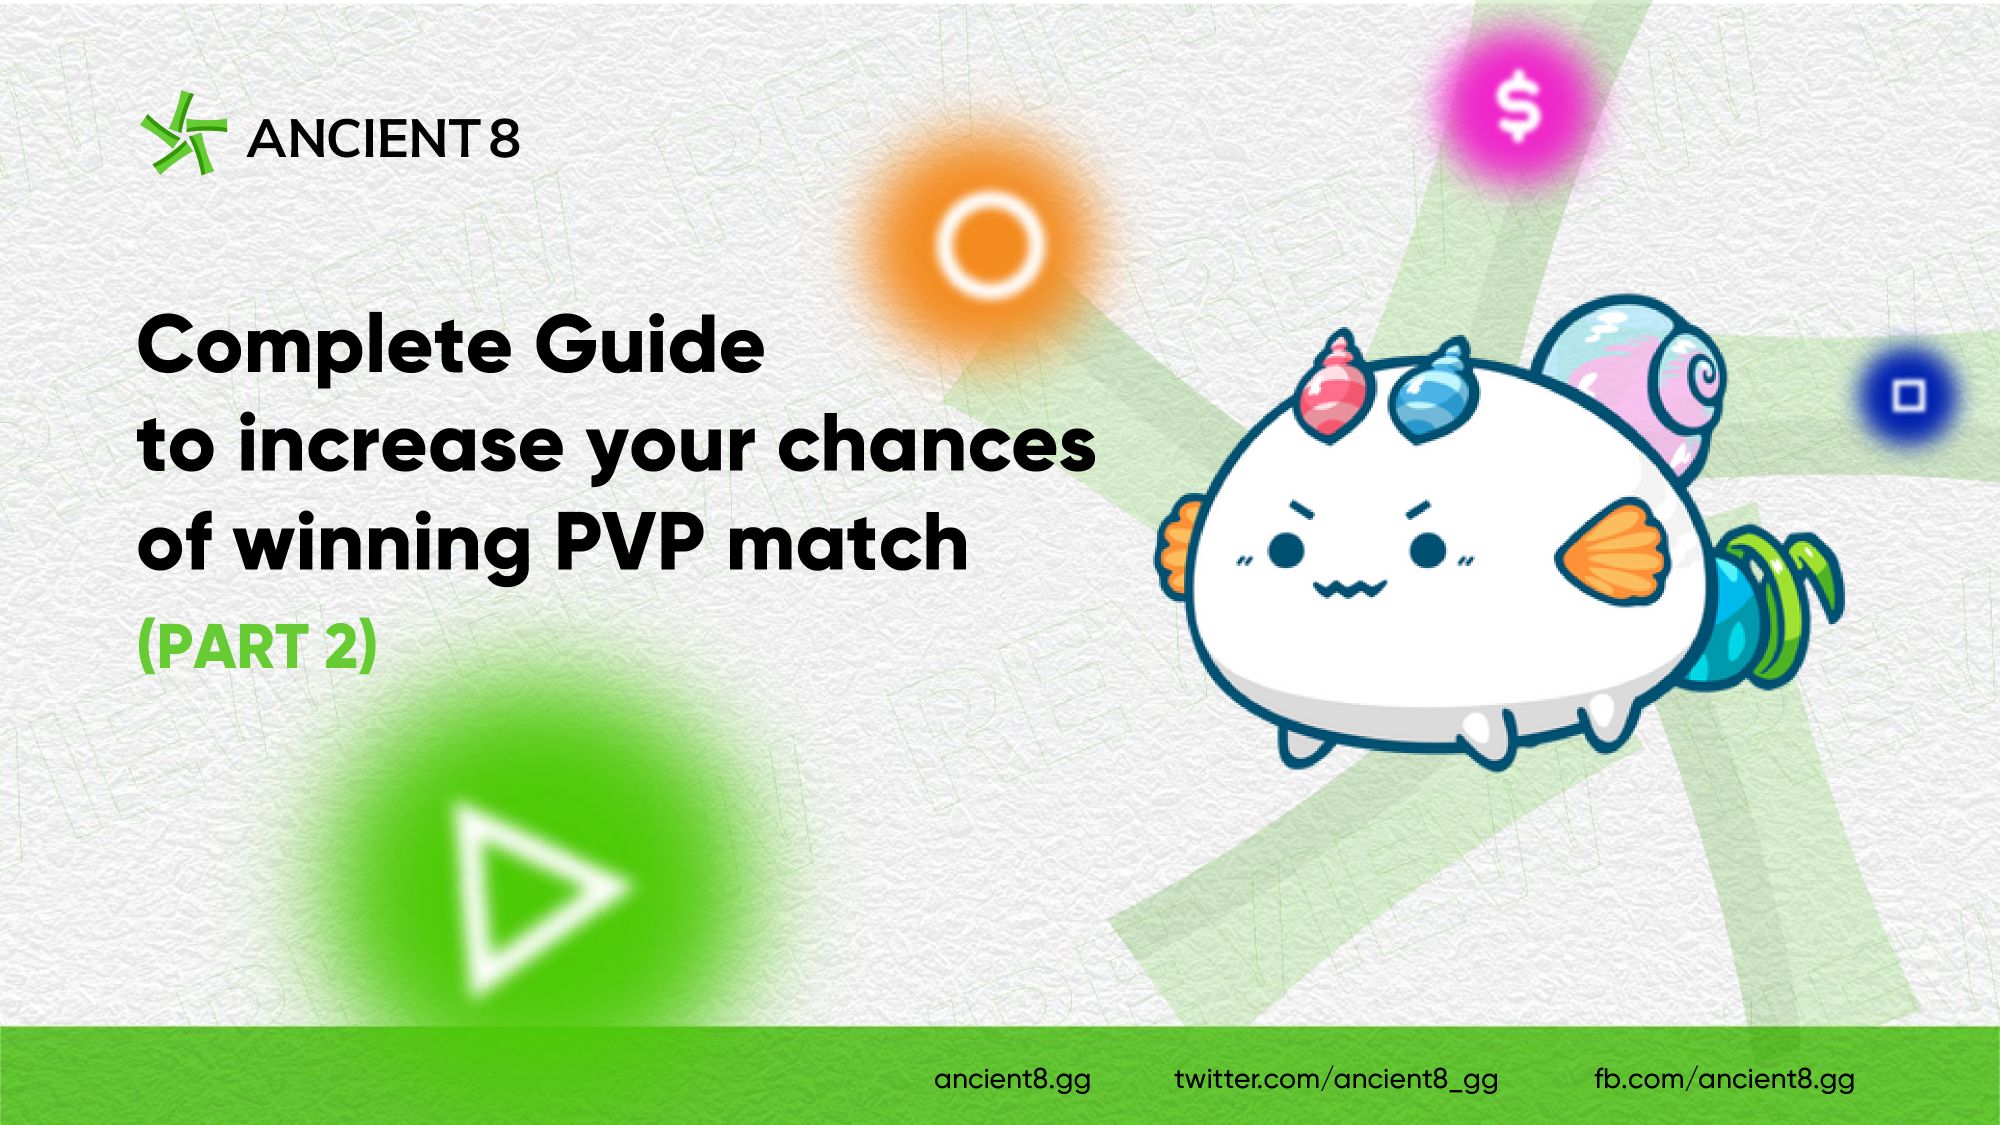 Complete Guide to increase your chances of winning PVP match (Part 2)